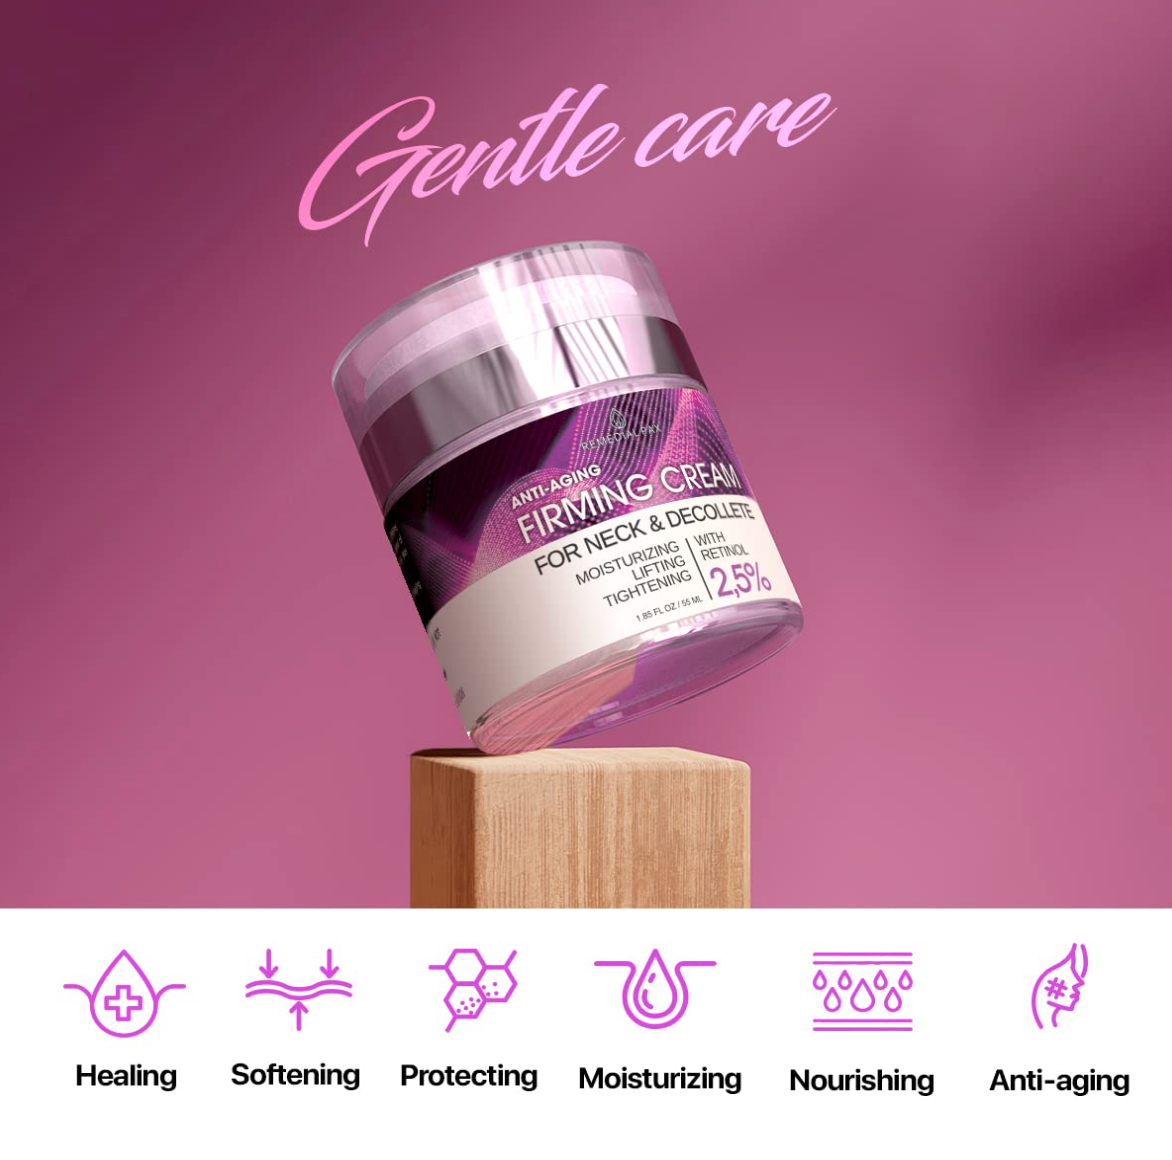 Neck Firming Cream - Anti Aging Facial Moisturizer with Retinol Collagen and Hyaluronic Acid